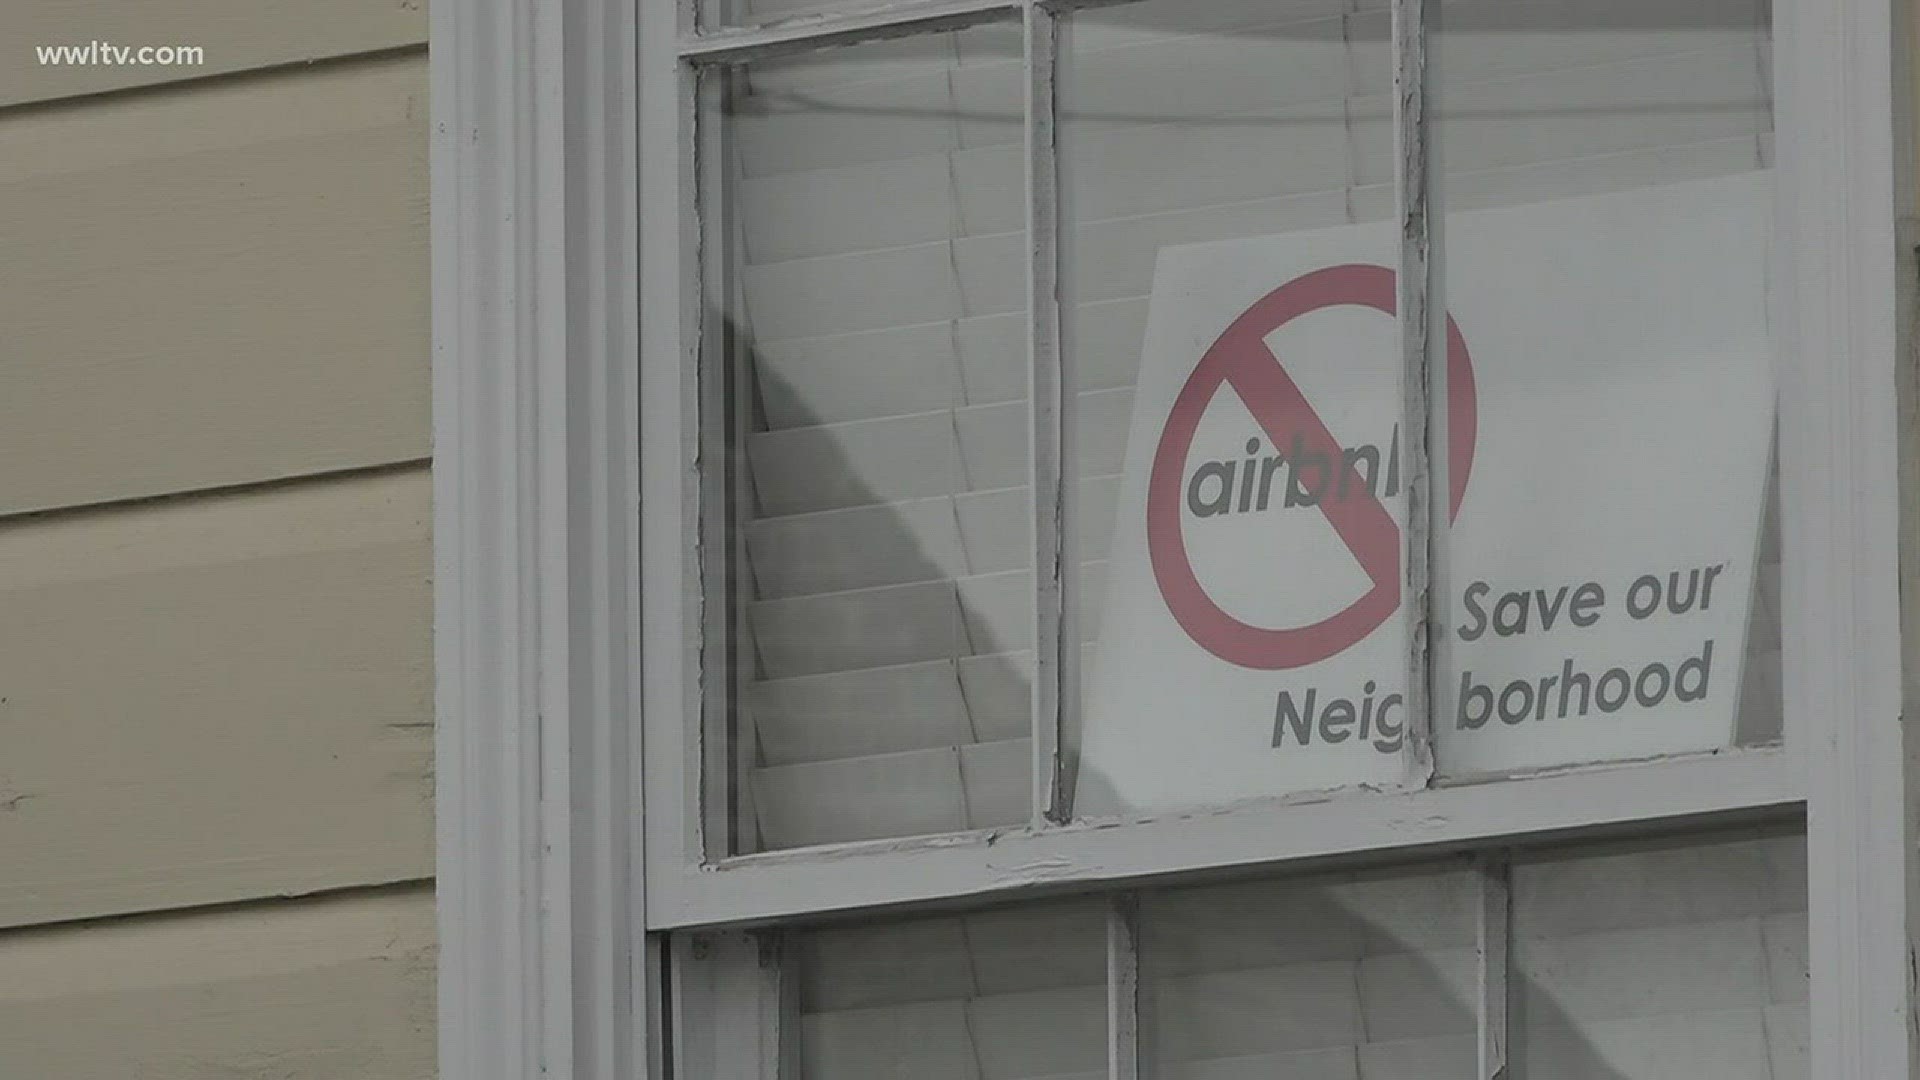 Few people in Jefferson Parish seemed upset when they learned short-term rentals were banned in the parish following the council's vote on Wednesday.